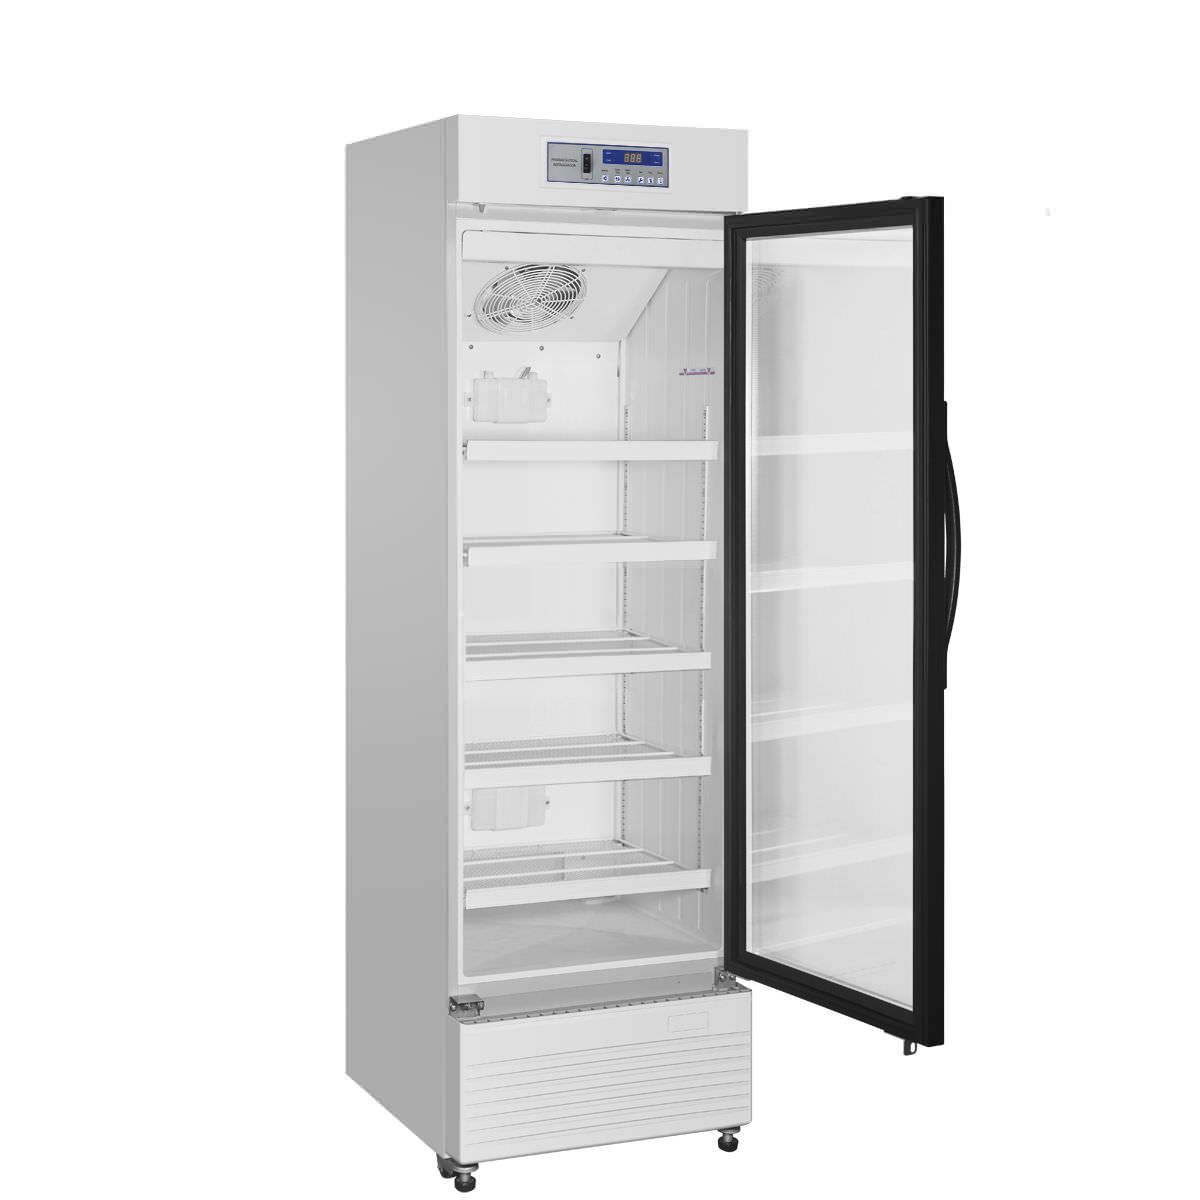 Pharmacy refrigerator / cabinet / 1-door 2 °C ... 8 °C, 360 L | HYC-360 Haier Medical and Laboratory Products